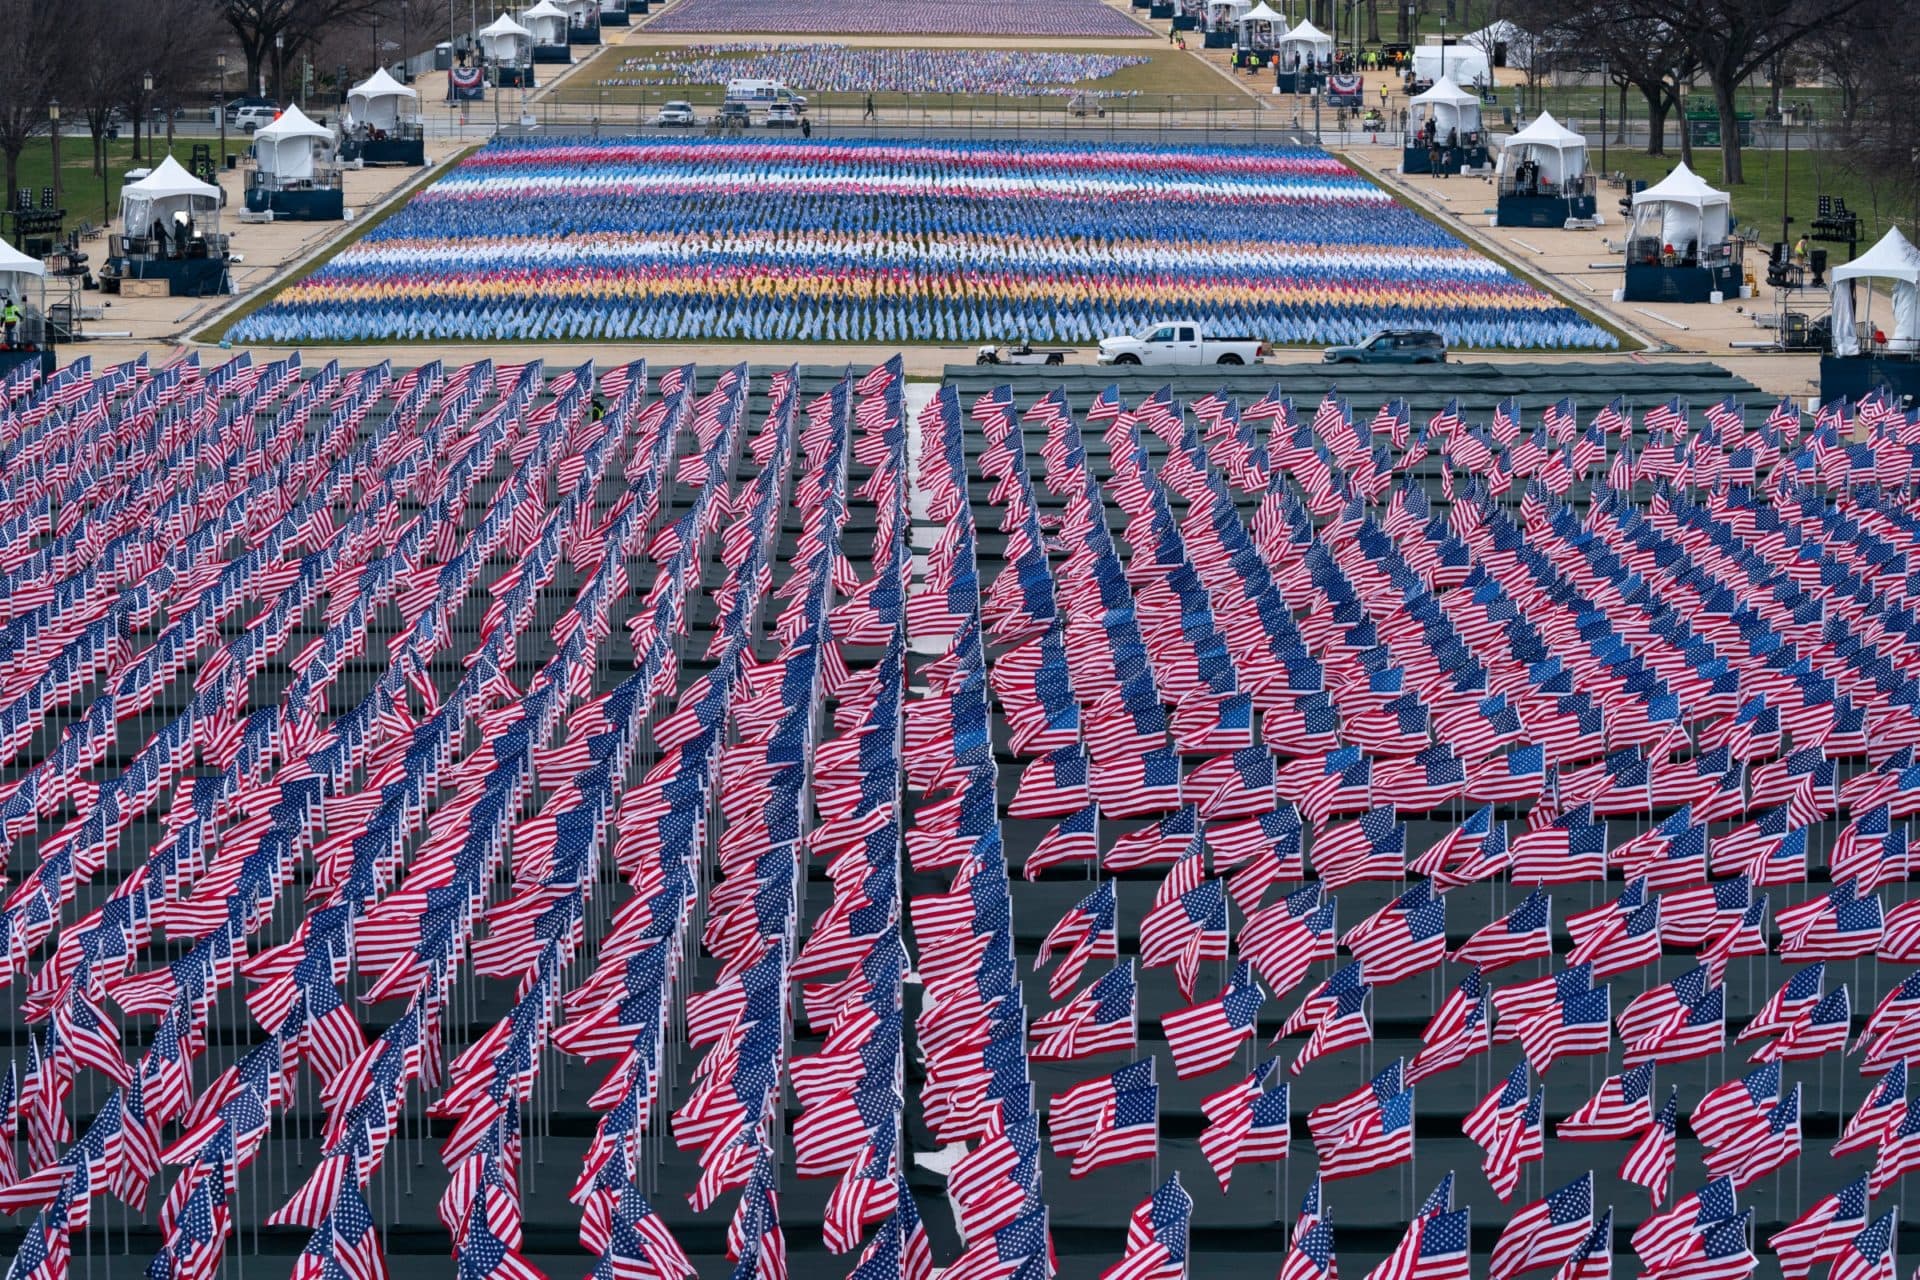 American flags are placed on the National Mall ahead of the presidential inauguration. (Alex Brandon/AP)